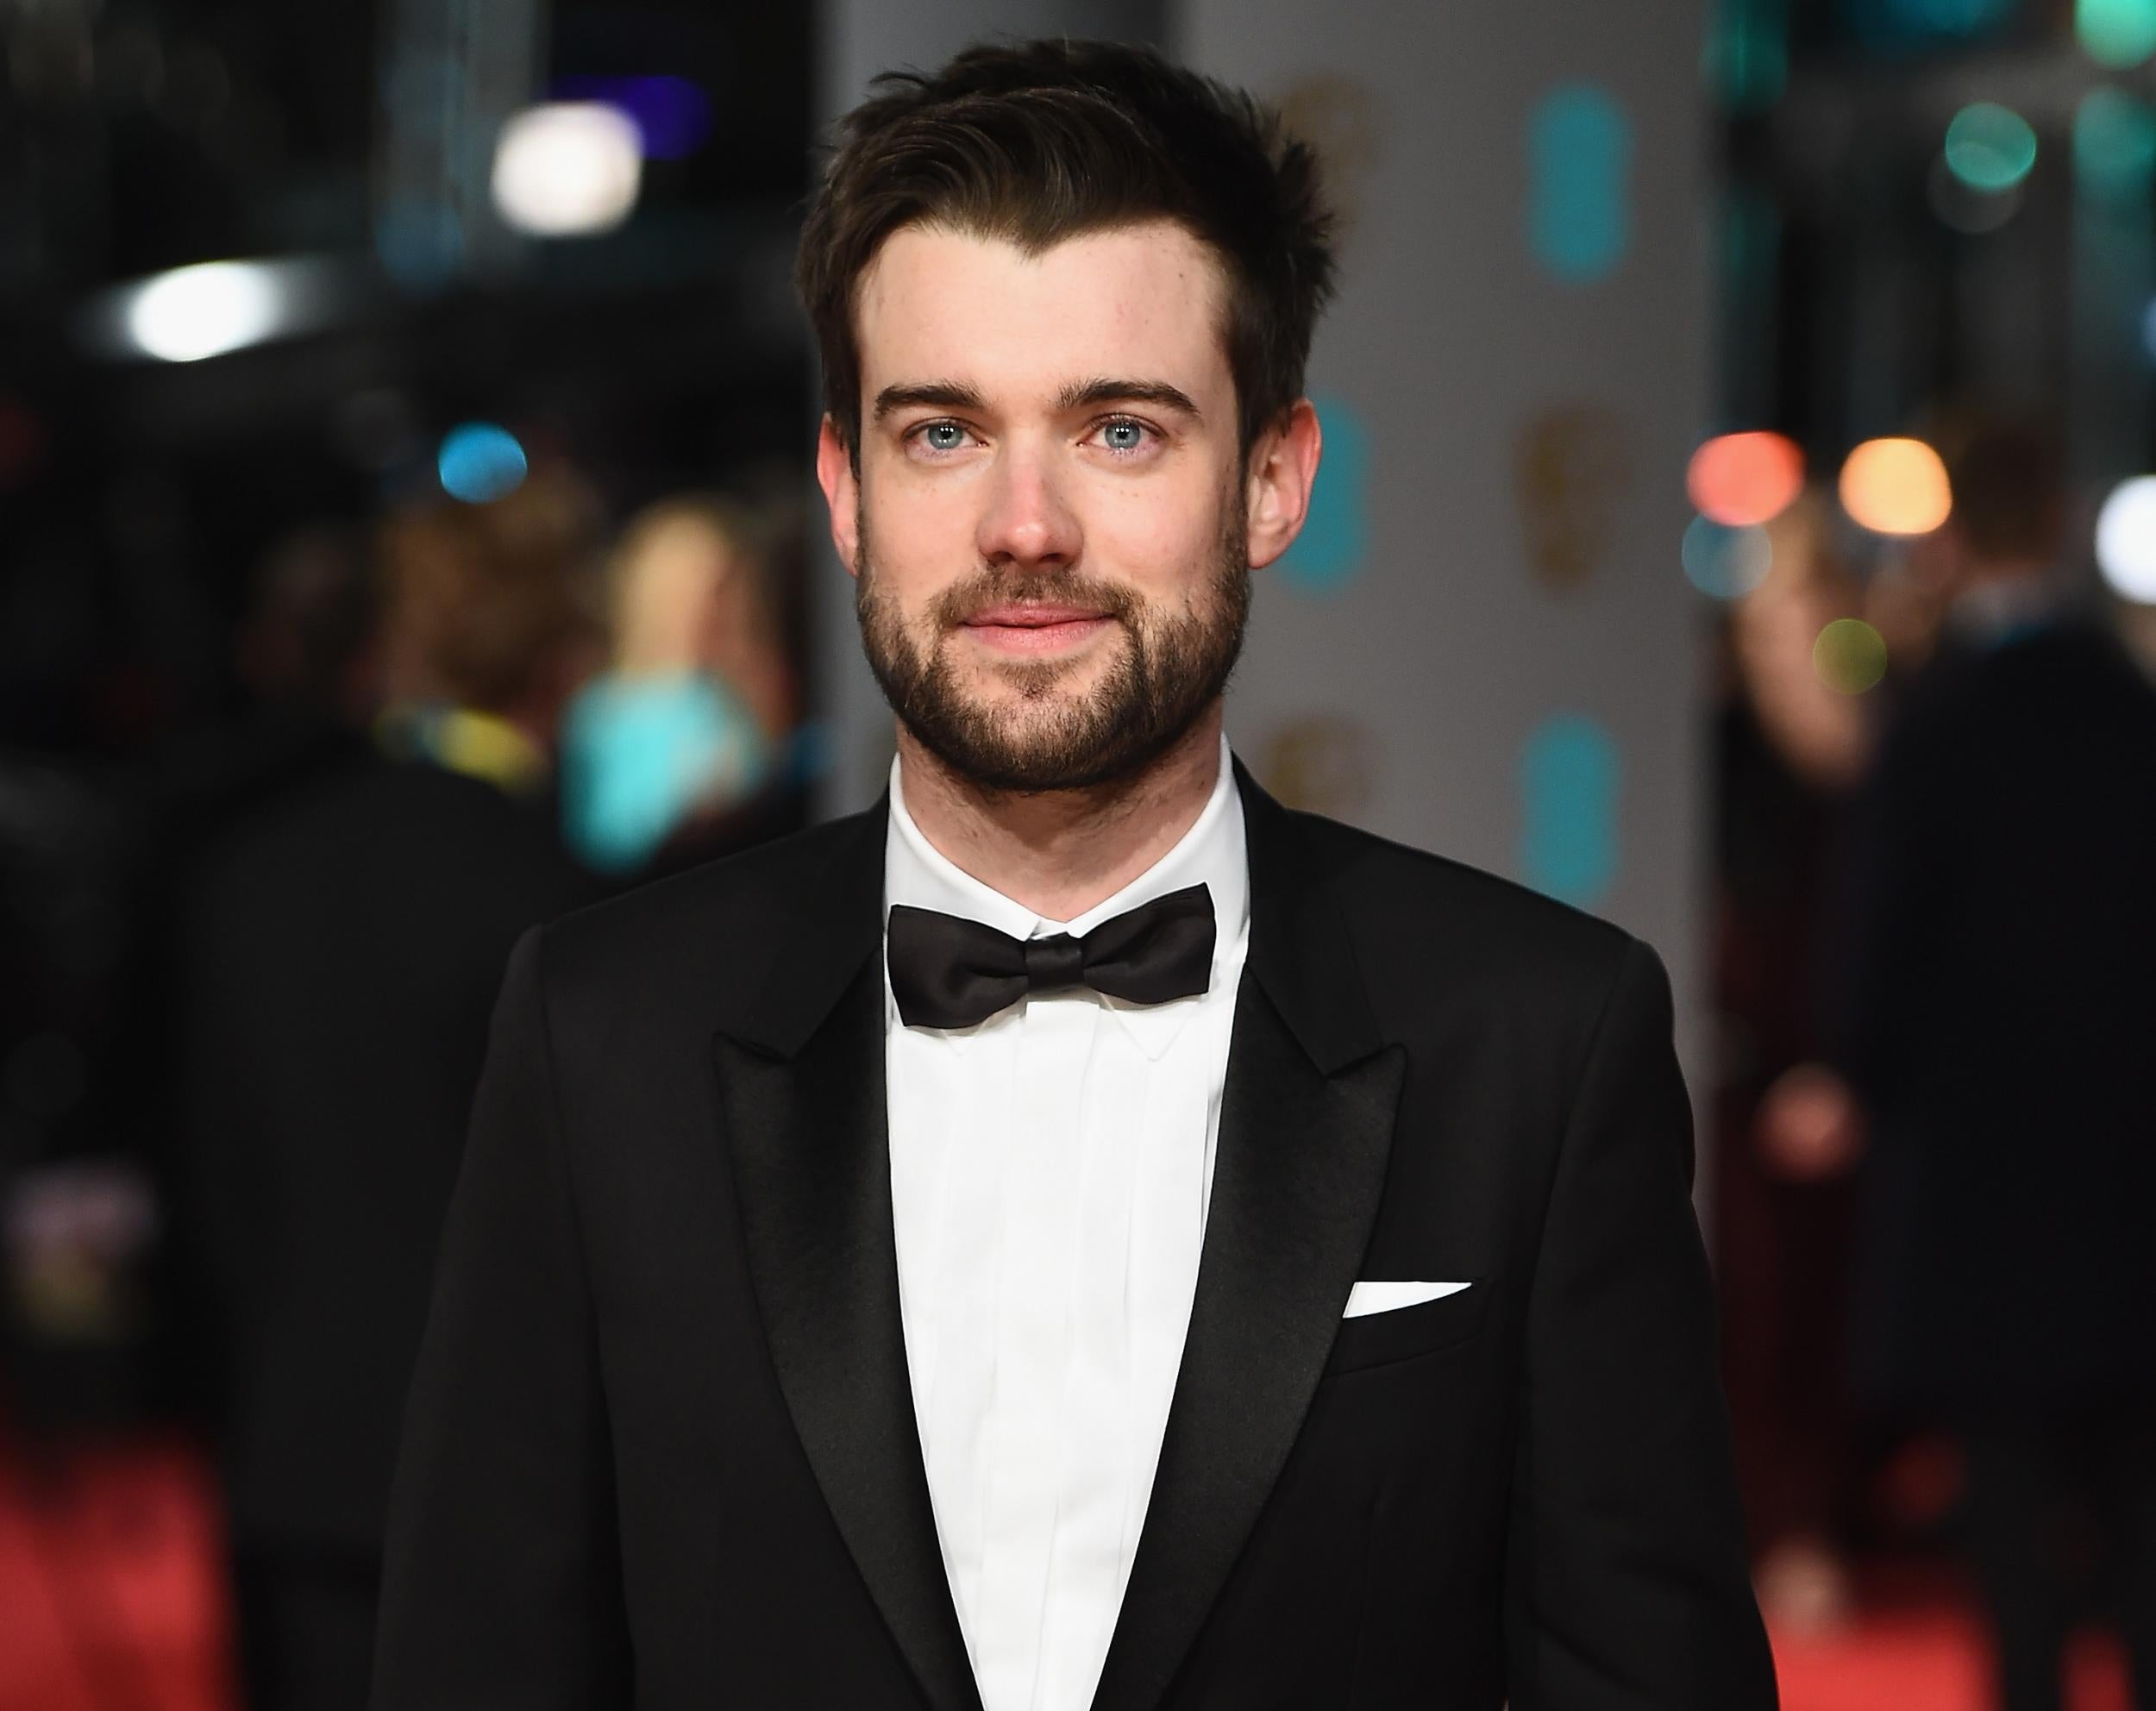 Comedian Jack Whitehall will host the 2018 BRIT Awards